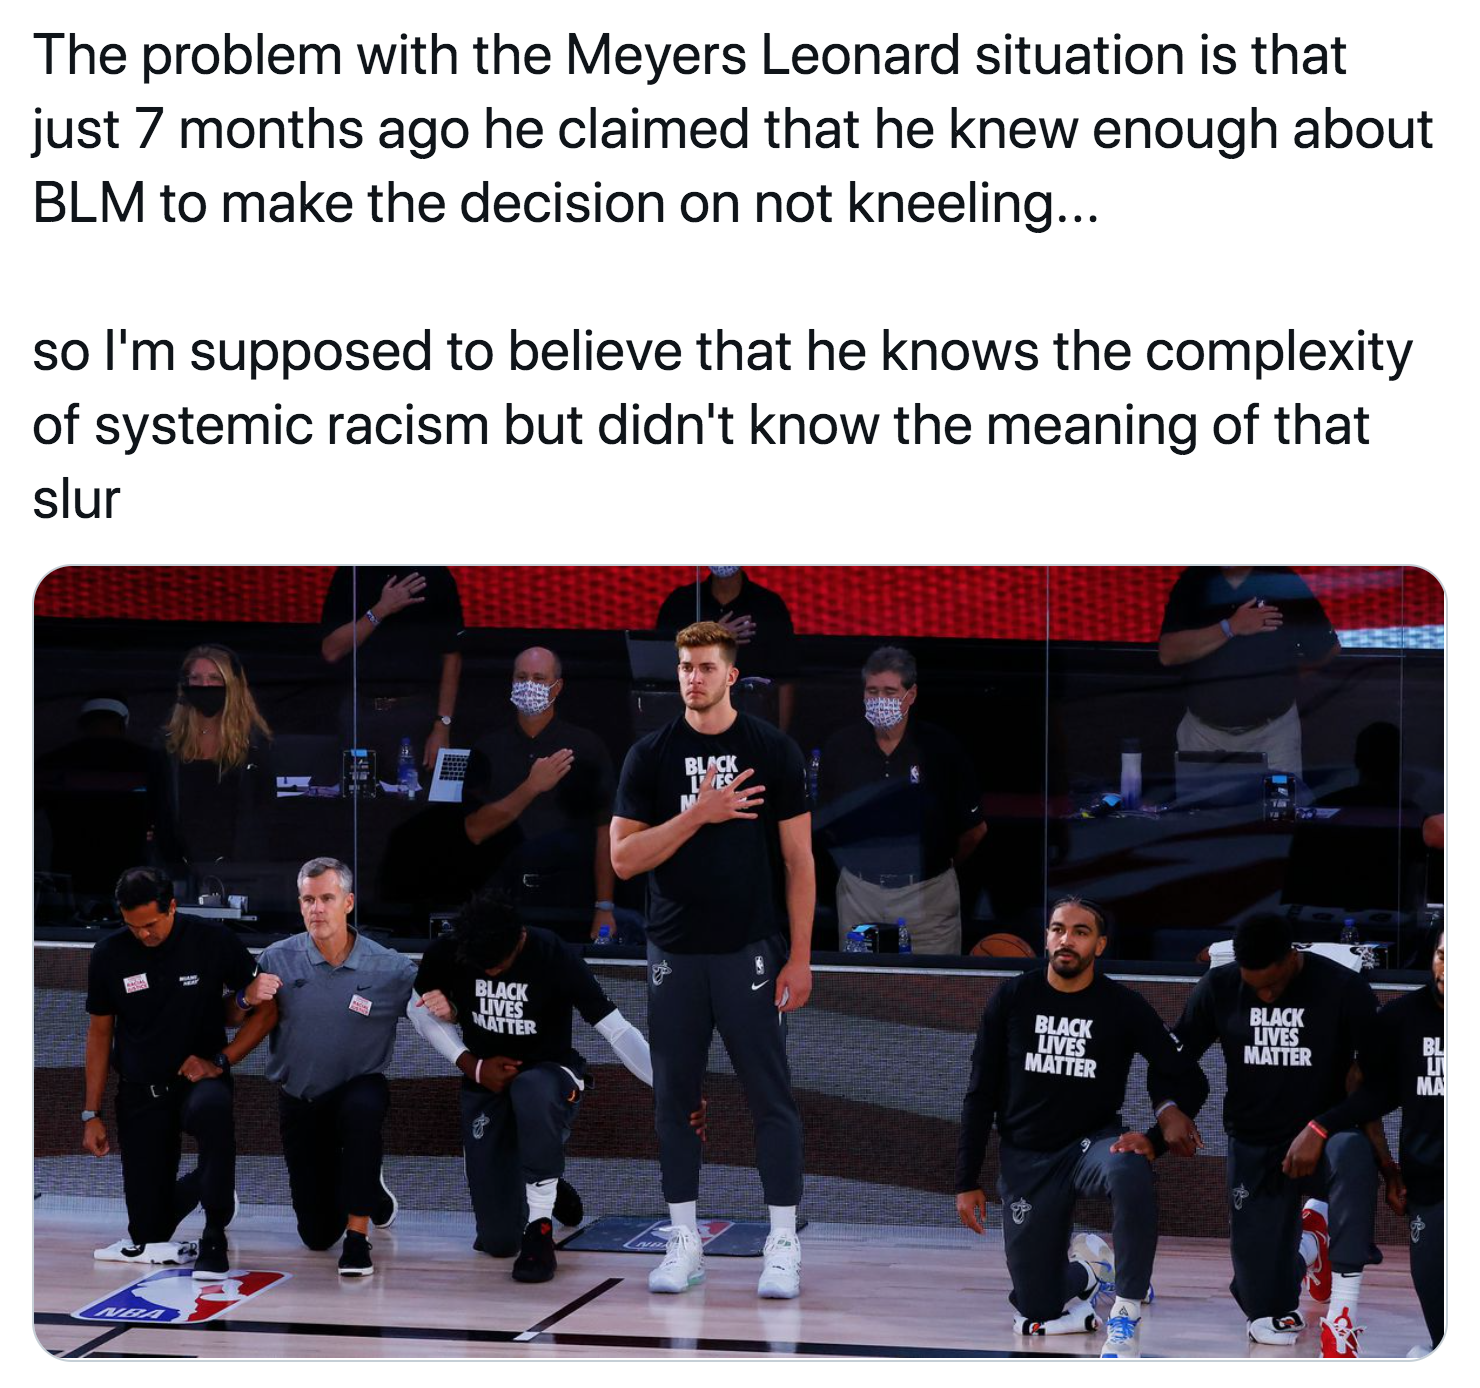 Meyers Leonard Anti-Semitic Slur - meyers leonard anthem - The problem with the Meyers Leonard situation is that just 7 months ago he claimed that he knew enough about Blm to make the decision on not kneeling... so I'm supposed to believe that he knows th